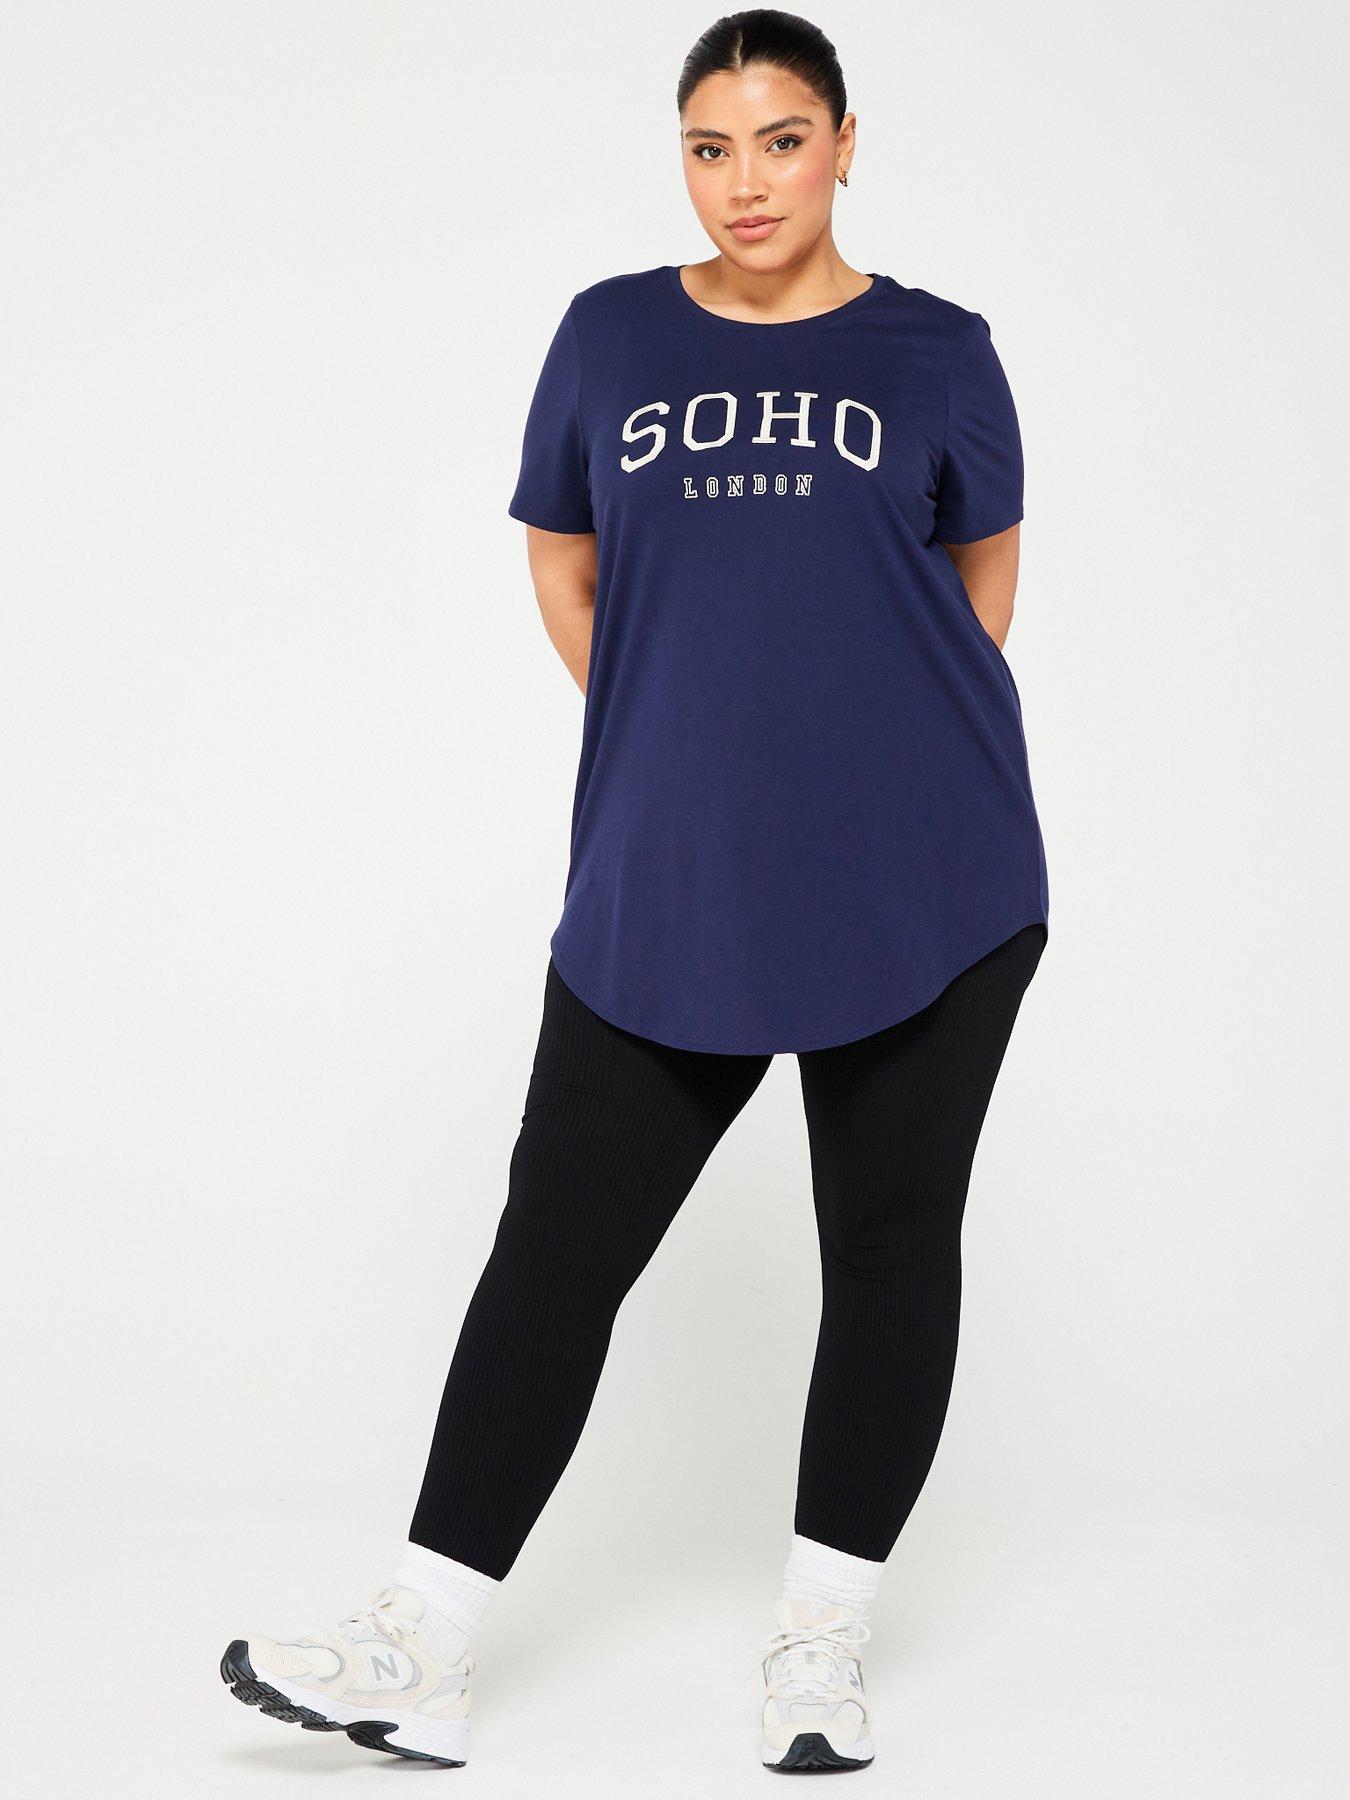 Plus Size Tops, Plus Size Evening Tops for Women